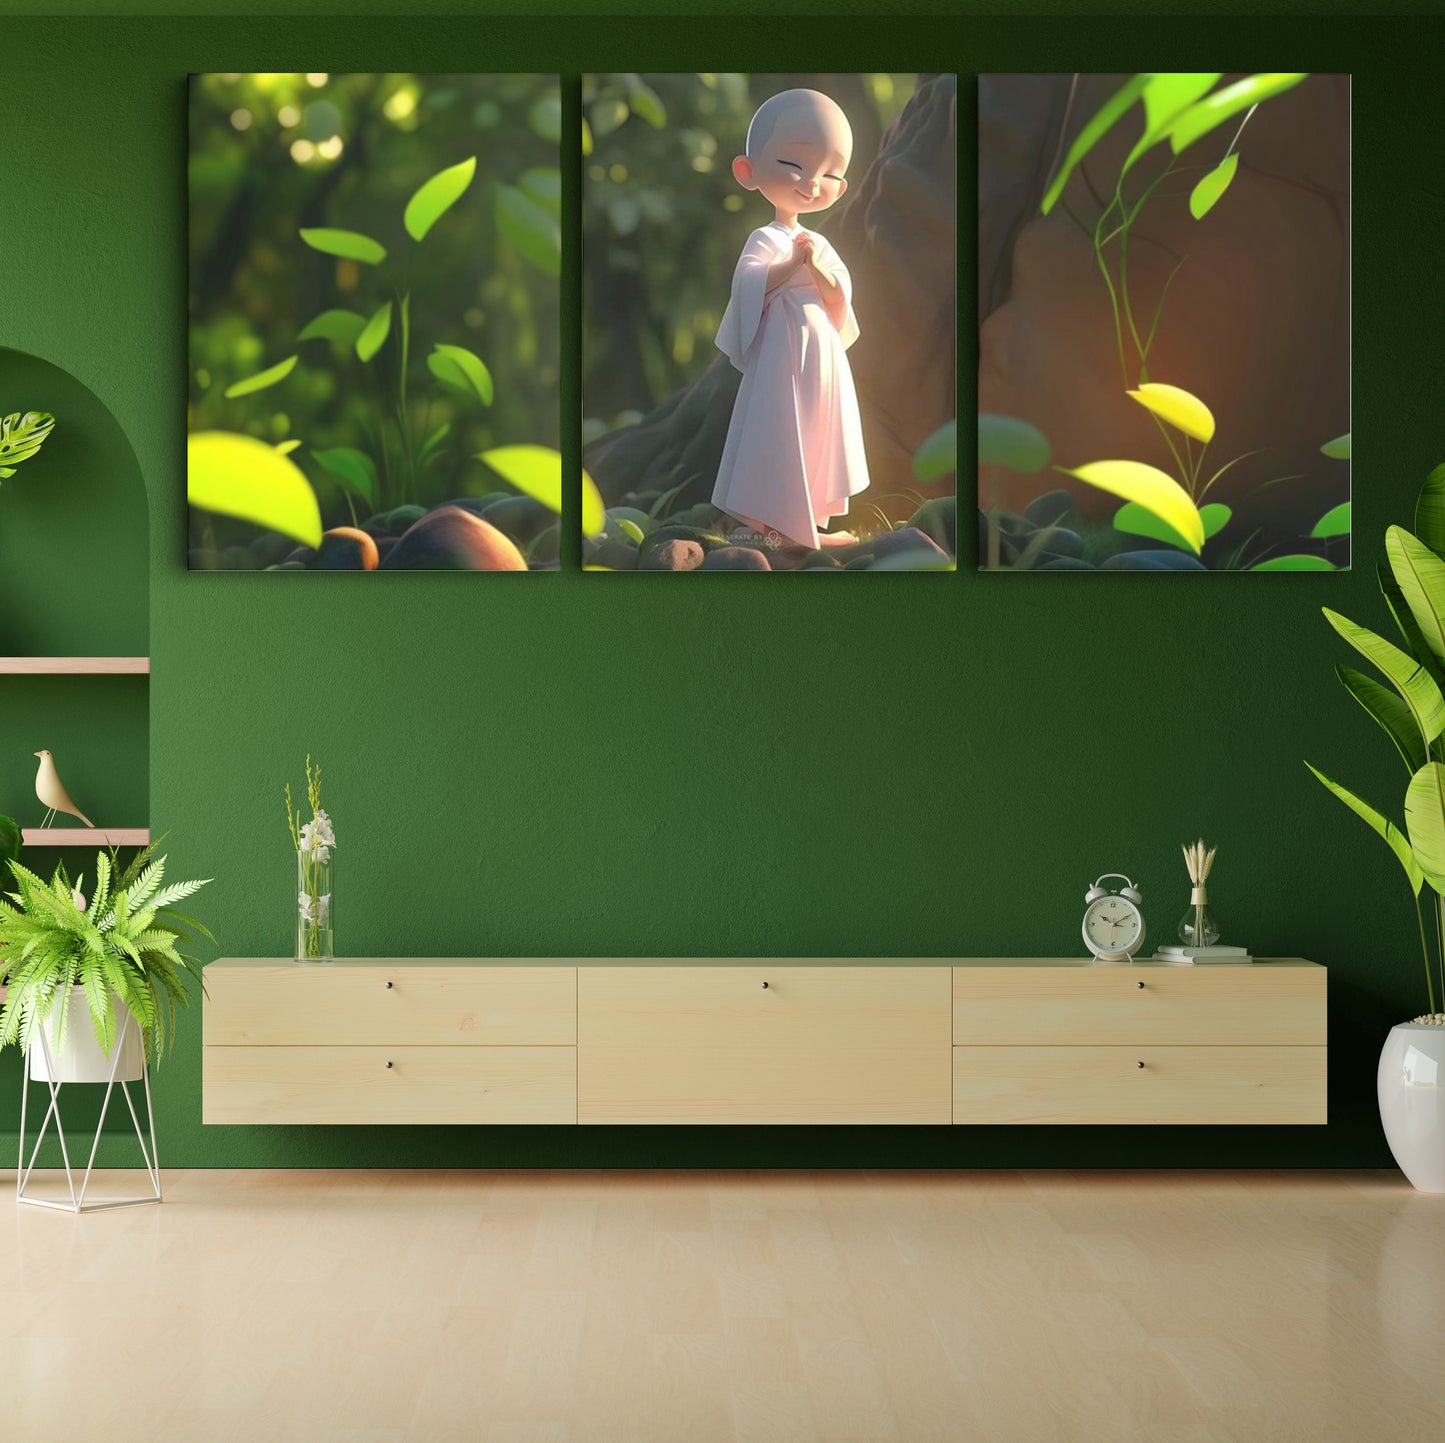 Tranquil Reverie: A Wall Art Capturing a Monk's Serenity in a Forest - Cultivate Inner Peace and Reflection through Nature's Embrace - S05E71